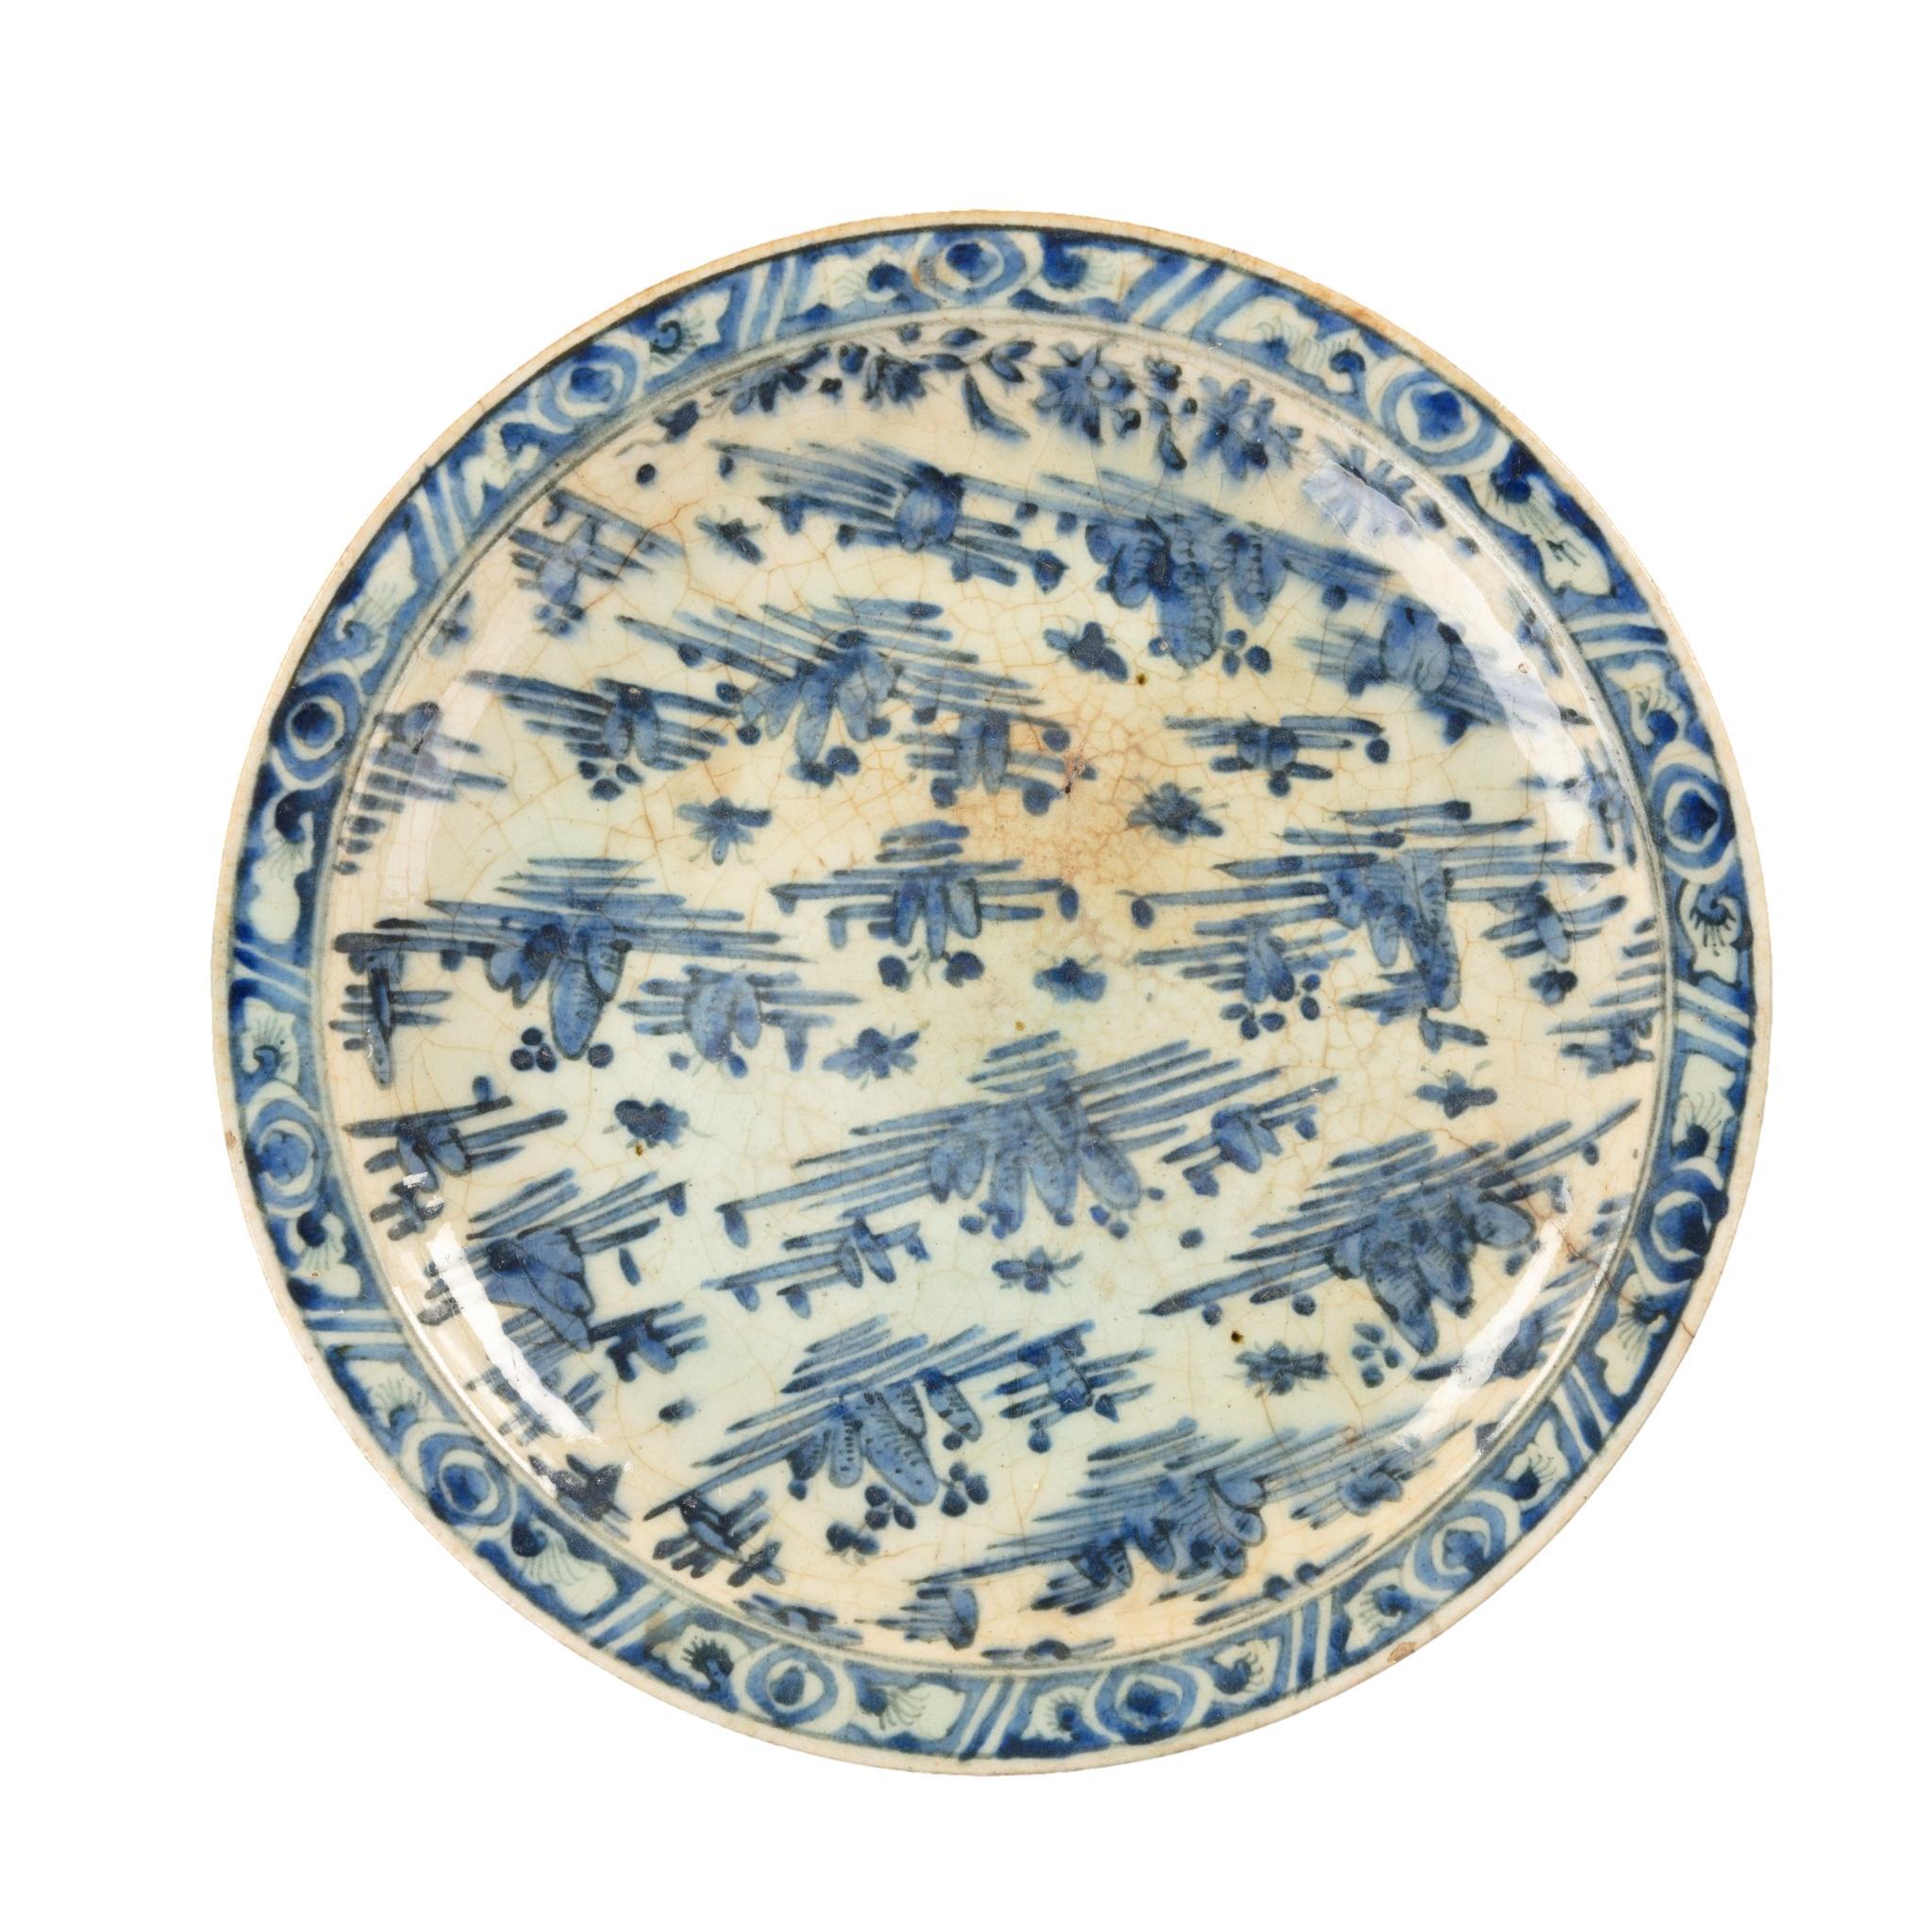 A Safavid blue and white pottery dish, of shallow circular form decorated in underglaze blue with scattered rocky outcrops, within a panelled rim, the reverse with stylised lappets.  Persian, 18th century.
